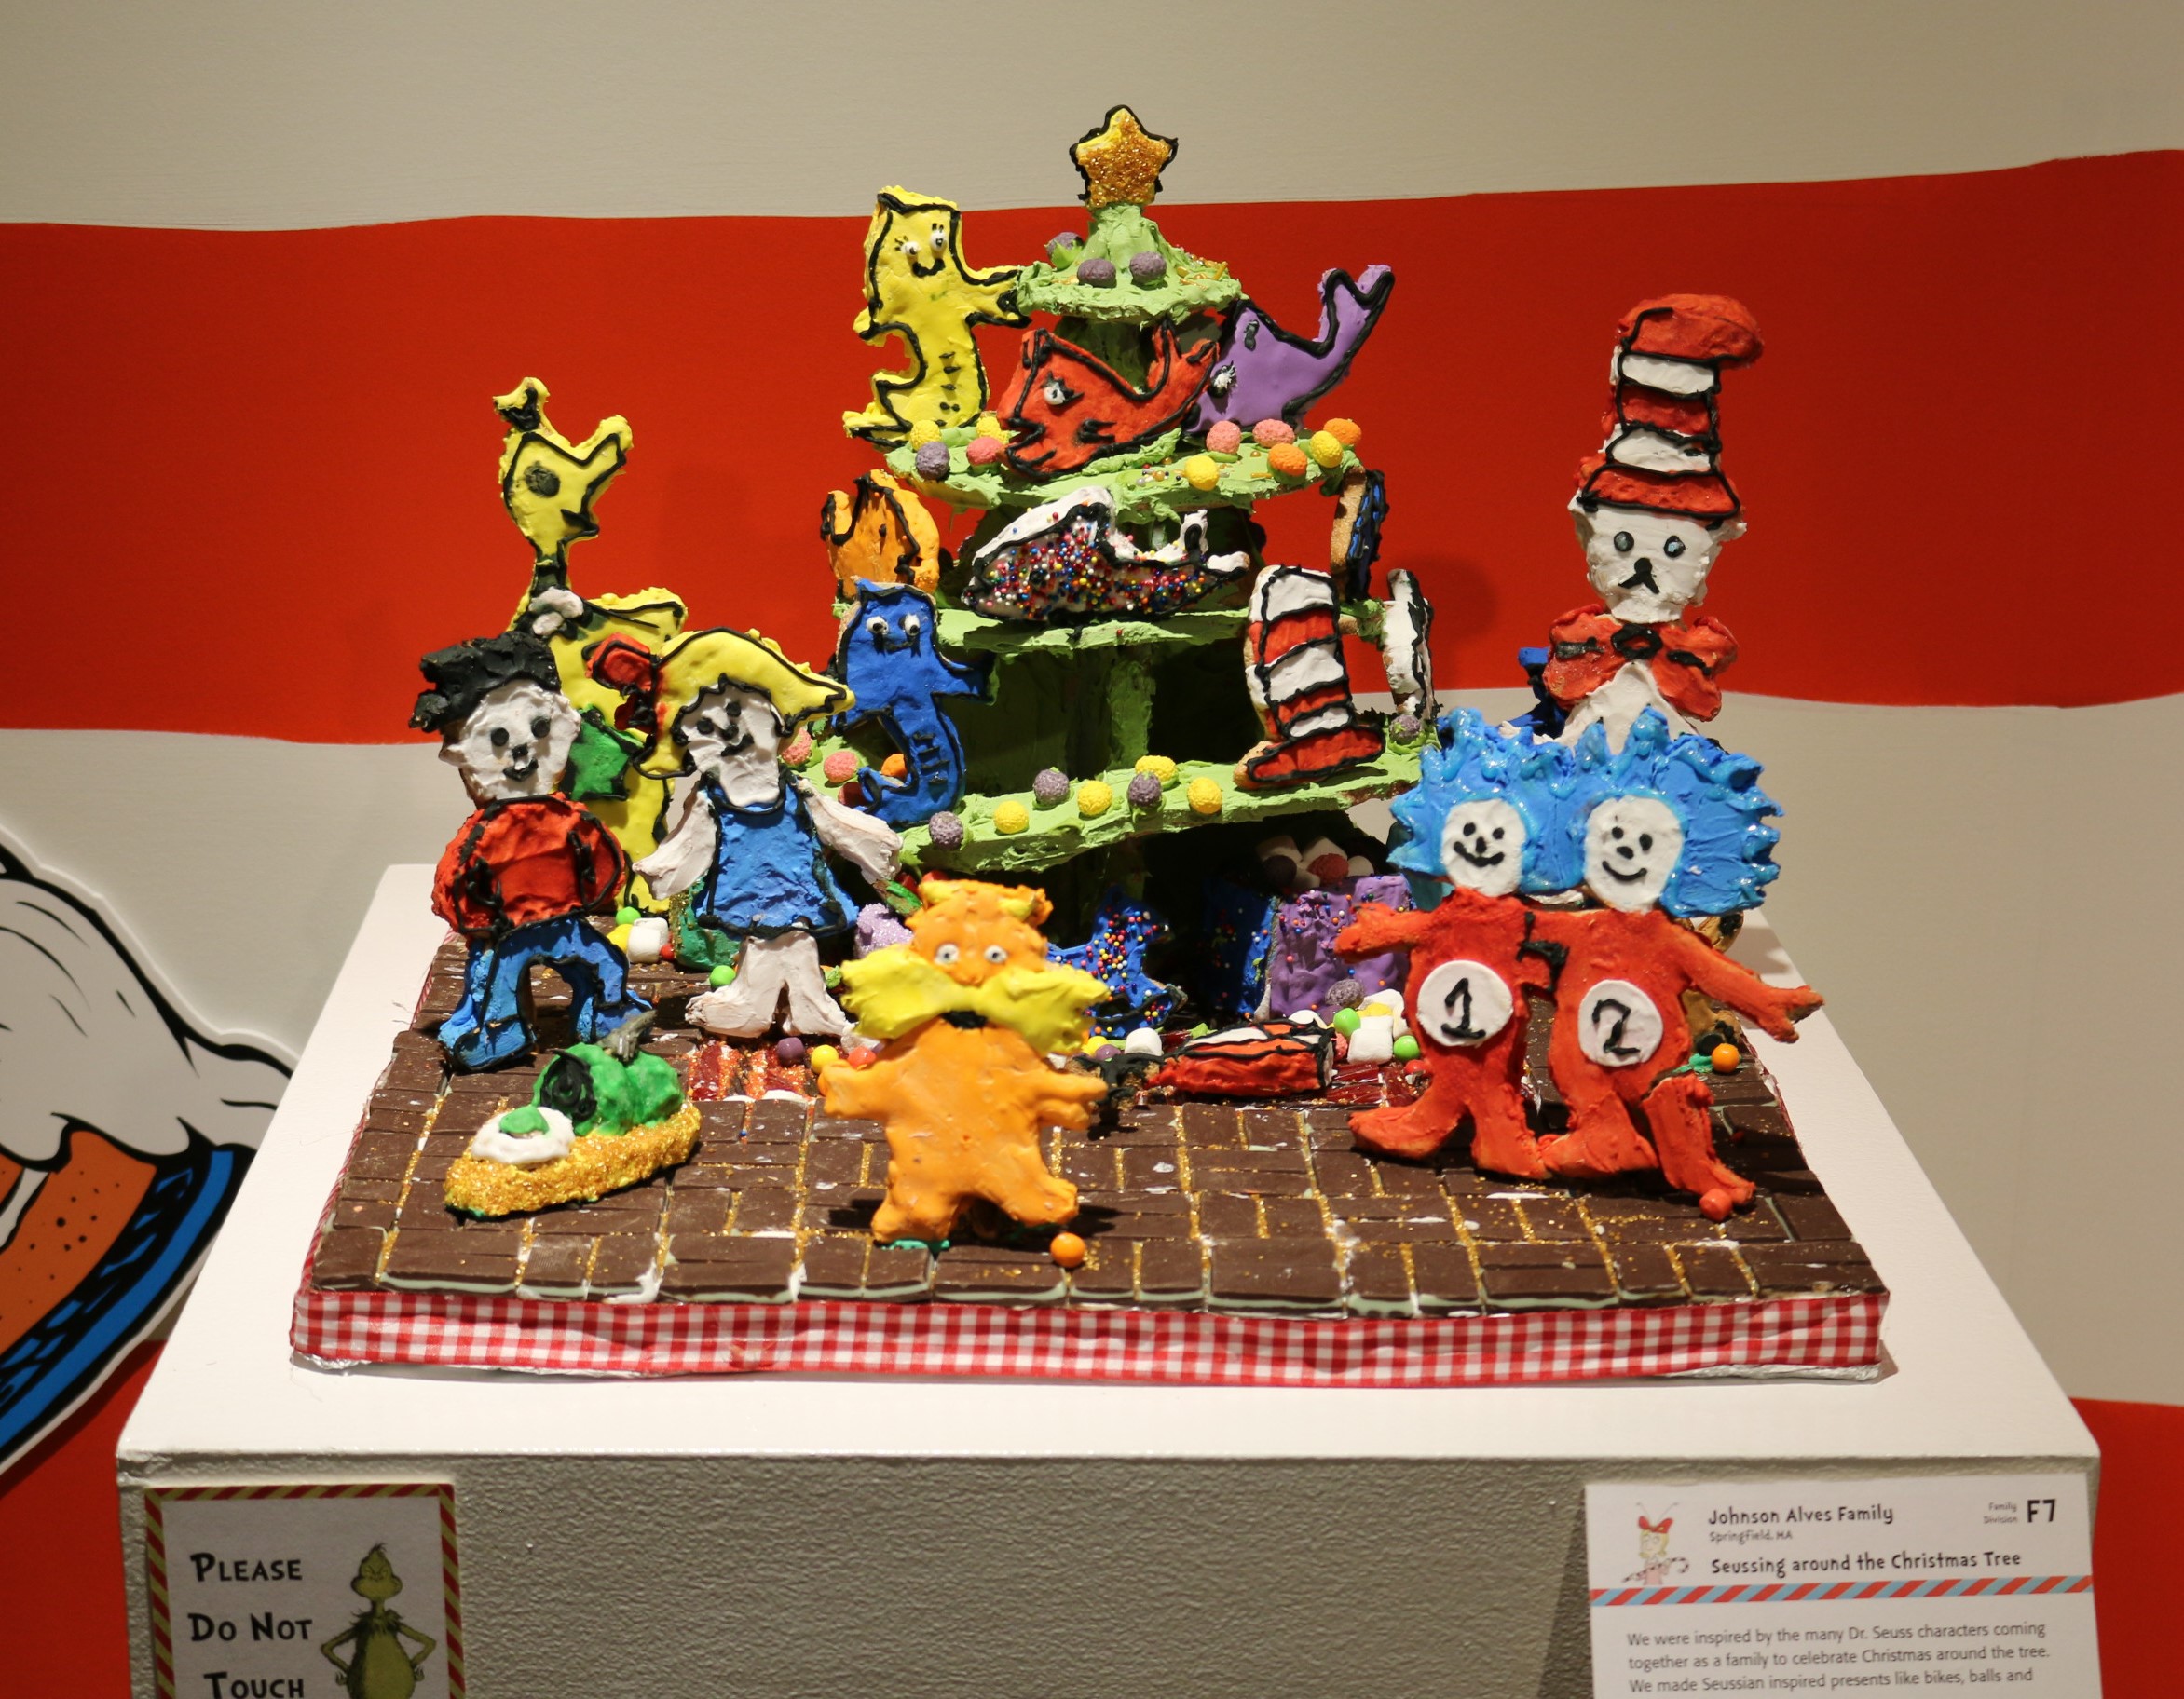 Gingerbread display titled "Seussing around the Christmas Tree" by The Johnson Alves Family